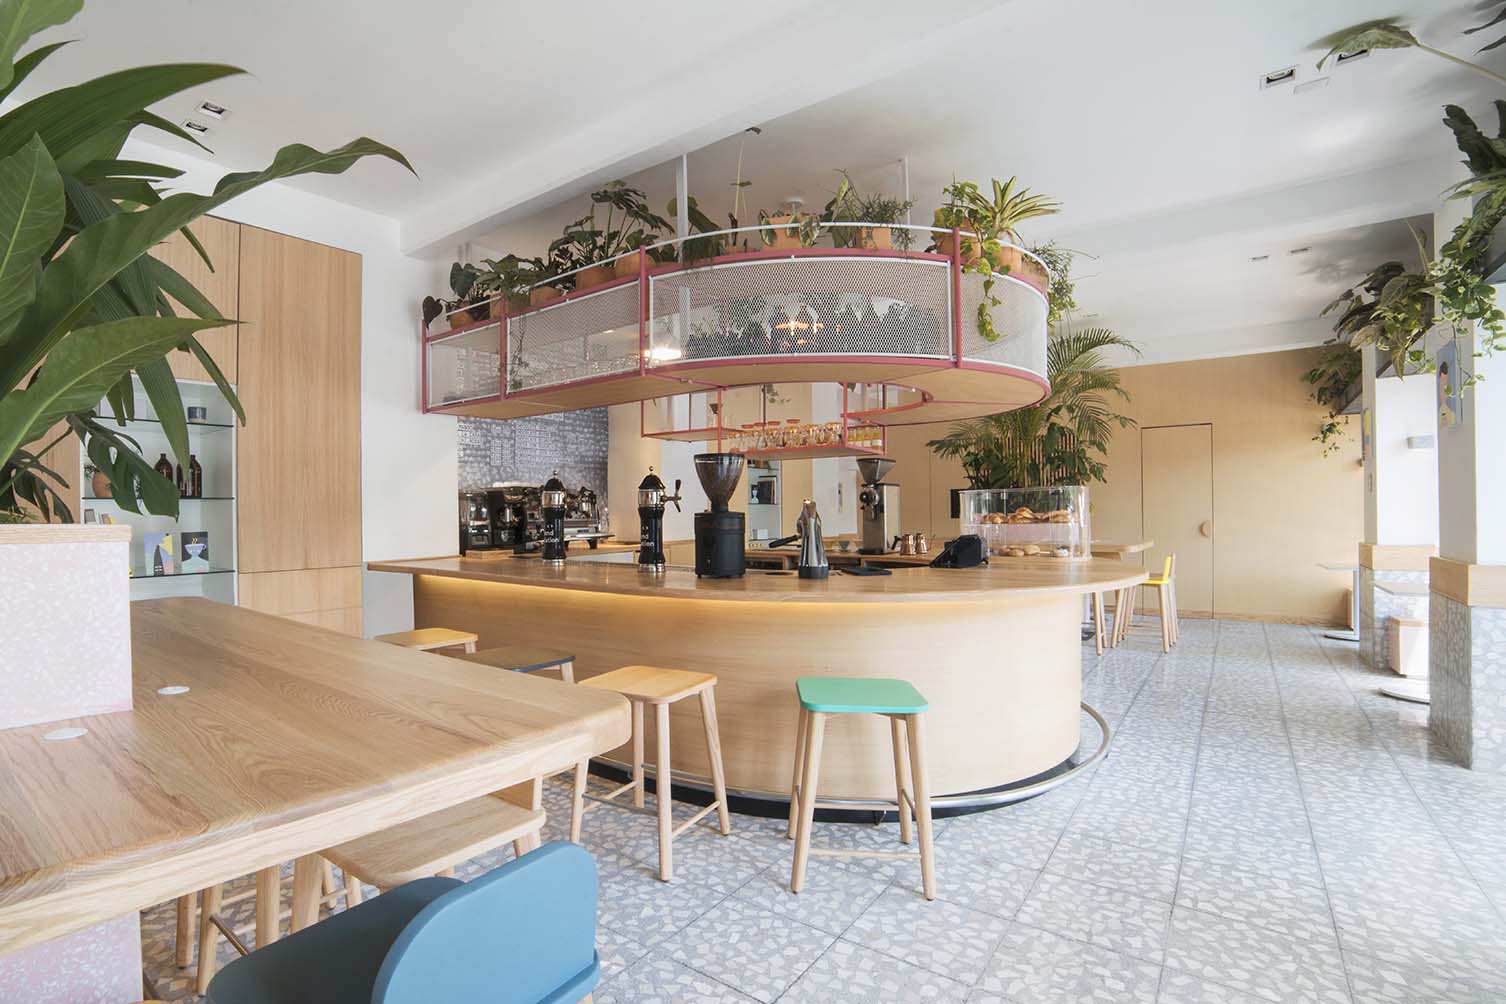 Blend Station Ii Is A Playful Sequel For Mexico City Third Wave Coffee Shop